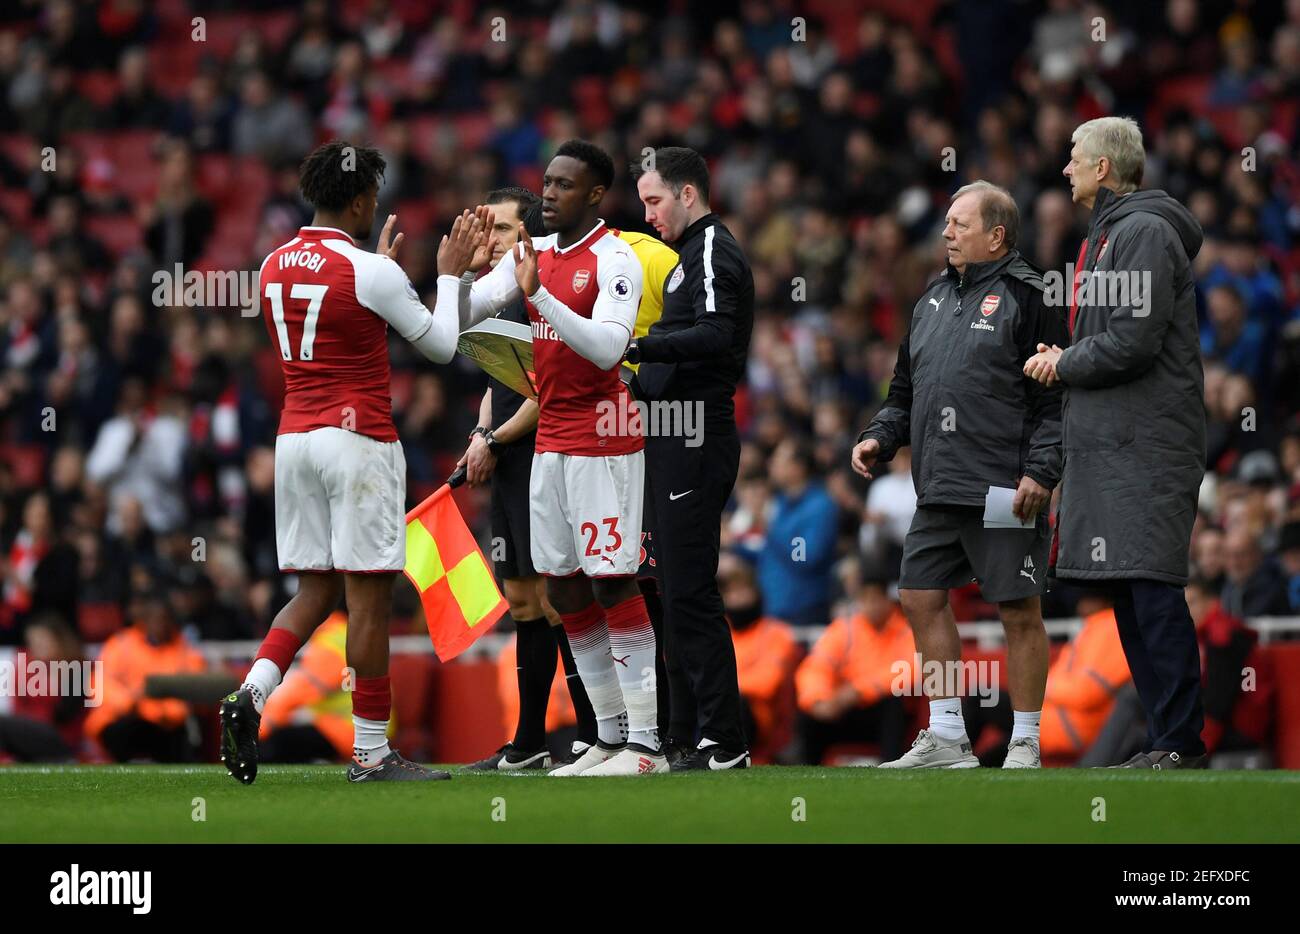 Soccer Football - Premier League - Arsenal vs Watford - Emirates Stadium, London, Britain - March 11, 2018   Arsenal's Danny Welbeck comes on as a substitute to replace Alex Iwobi            Action Images via Reuters/Tony O'Brien    EDITORIAL USE ONLY. No use with unauthorized audio, video, data, fixture lists, club/league logos or 'live' services. Online in-match use limited to 75 images, no video emulation. No use in betting, games or single club/league/player publications.  Please contact your account representative for further details. Stock Photo